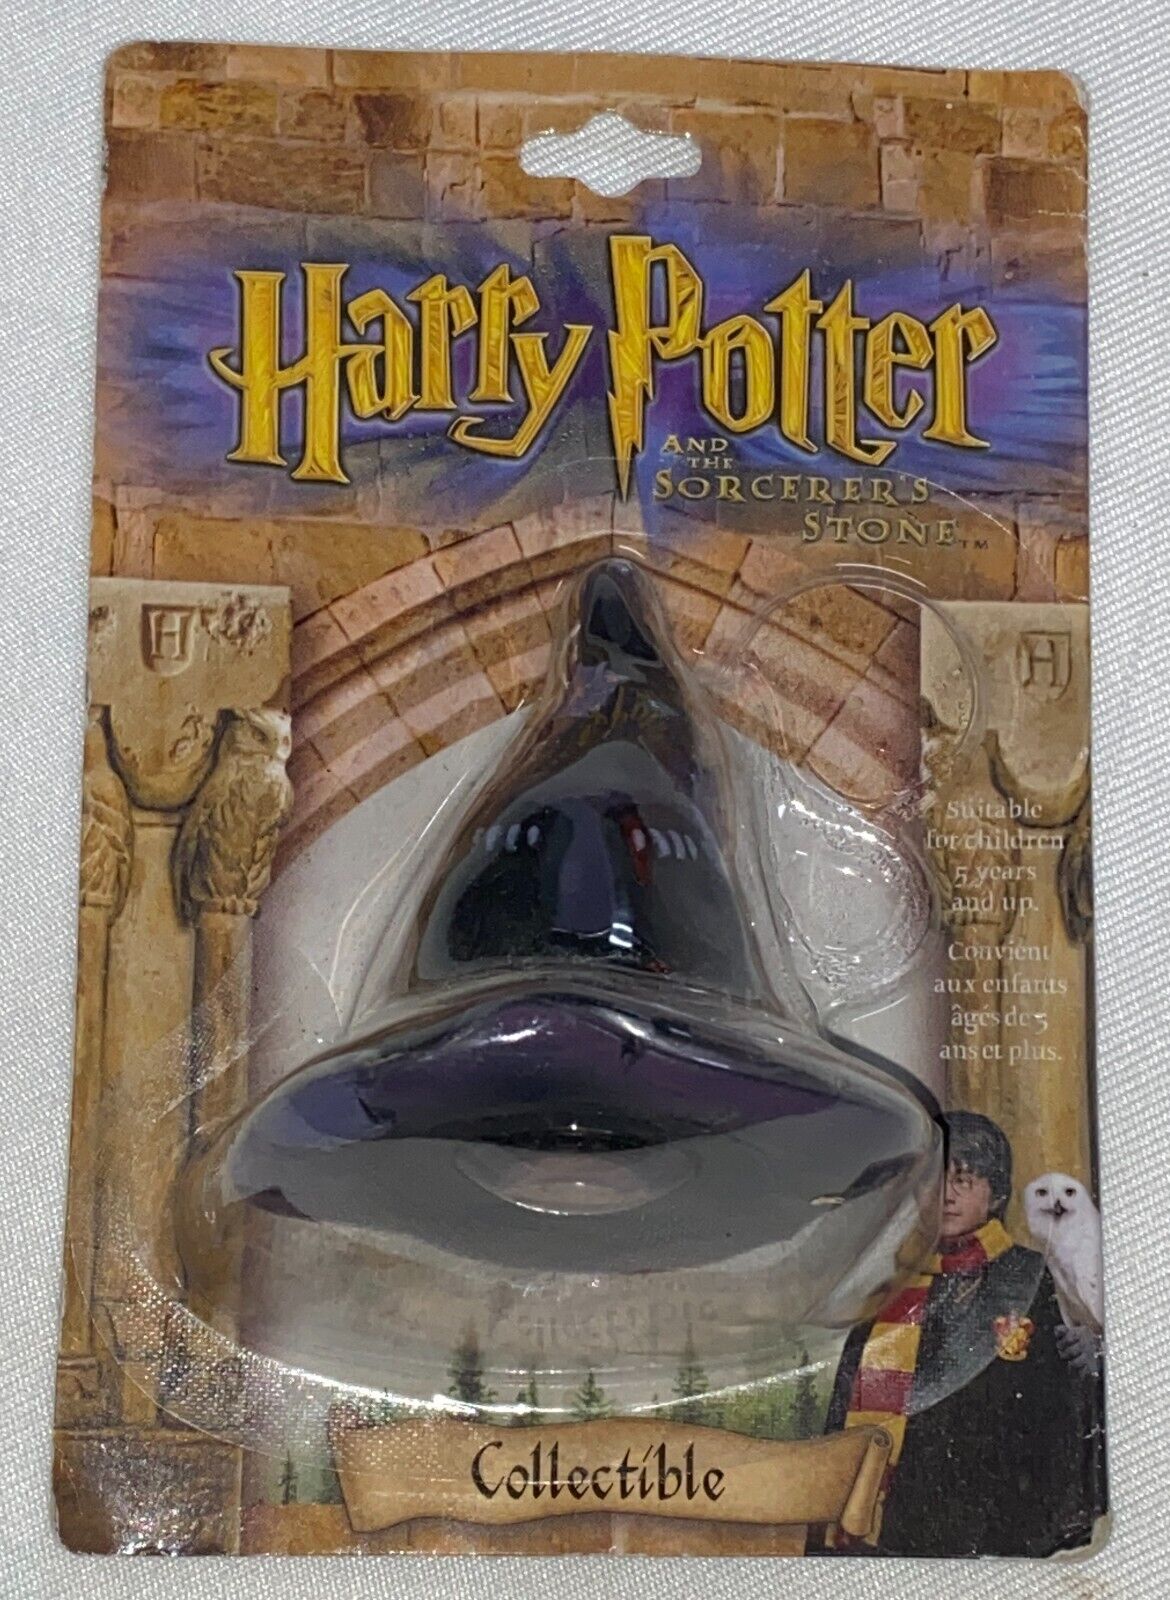 2000 NOS Vintage Harry Potter Chamber Secrets Sorting Hat Magic 8 Ball Keychain